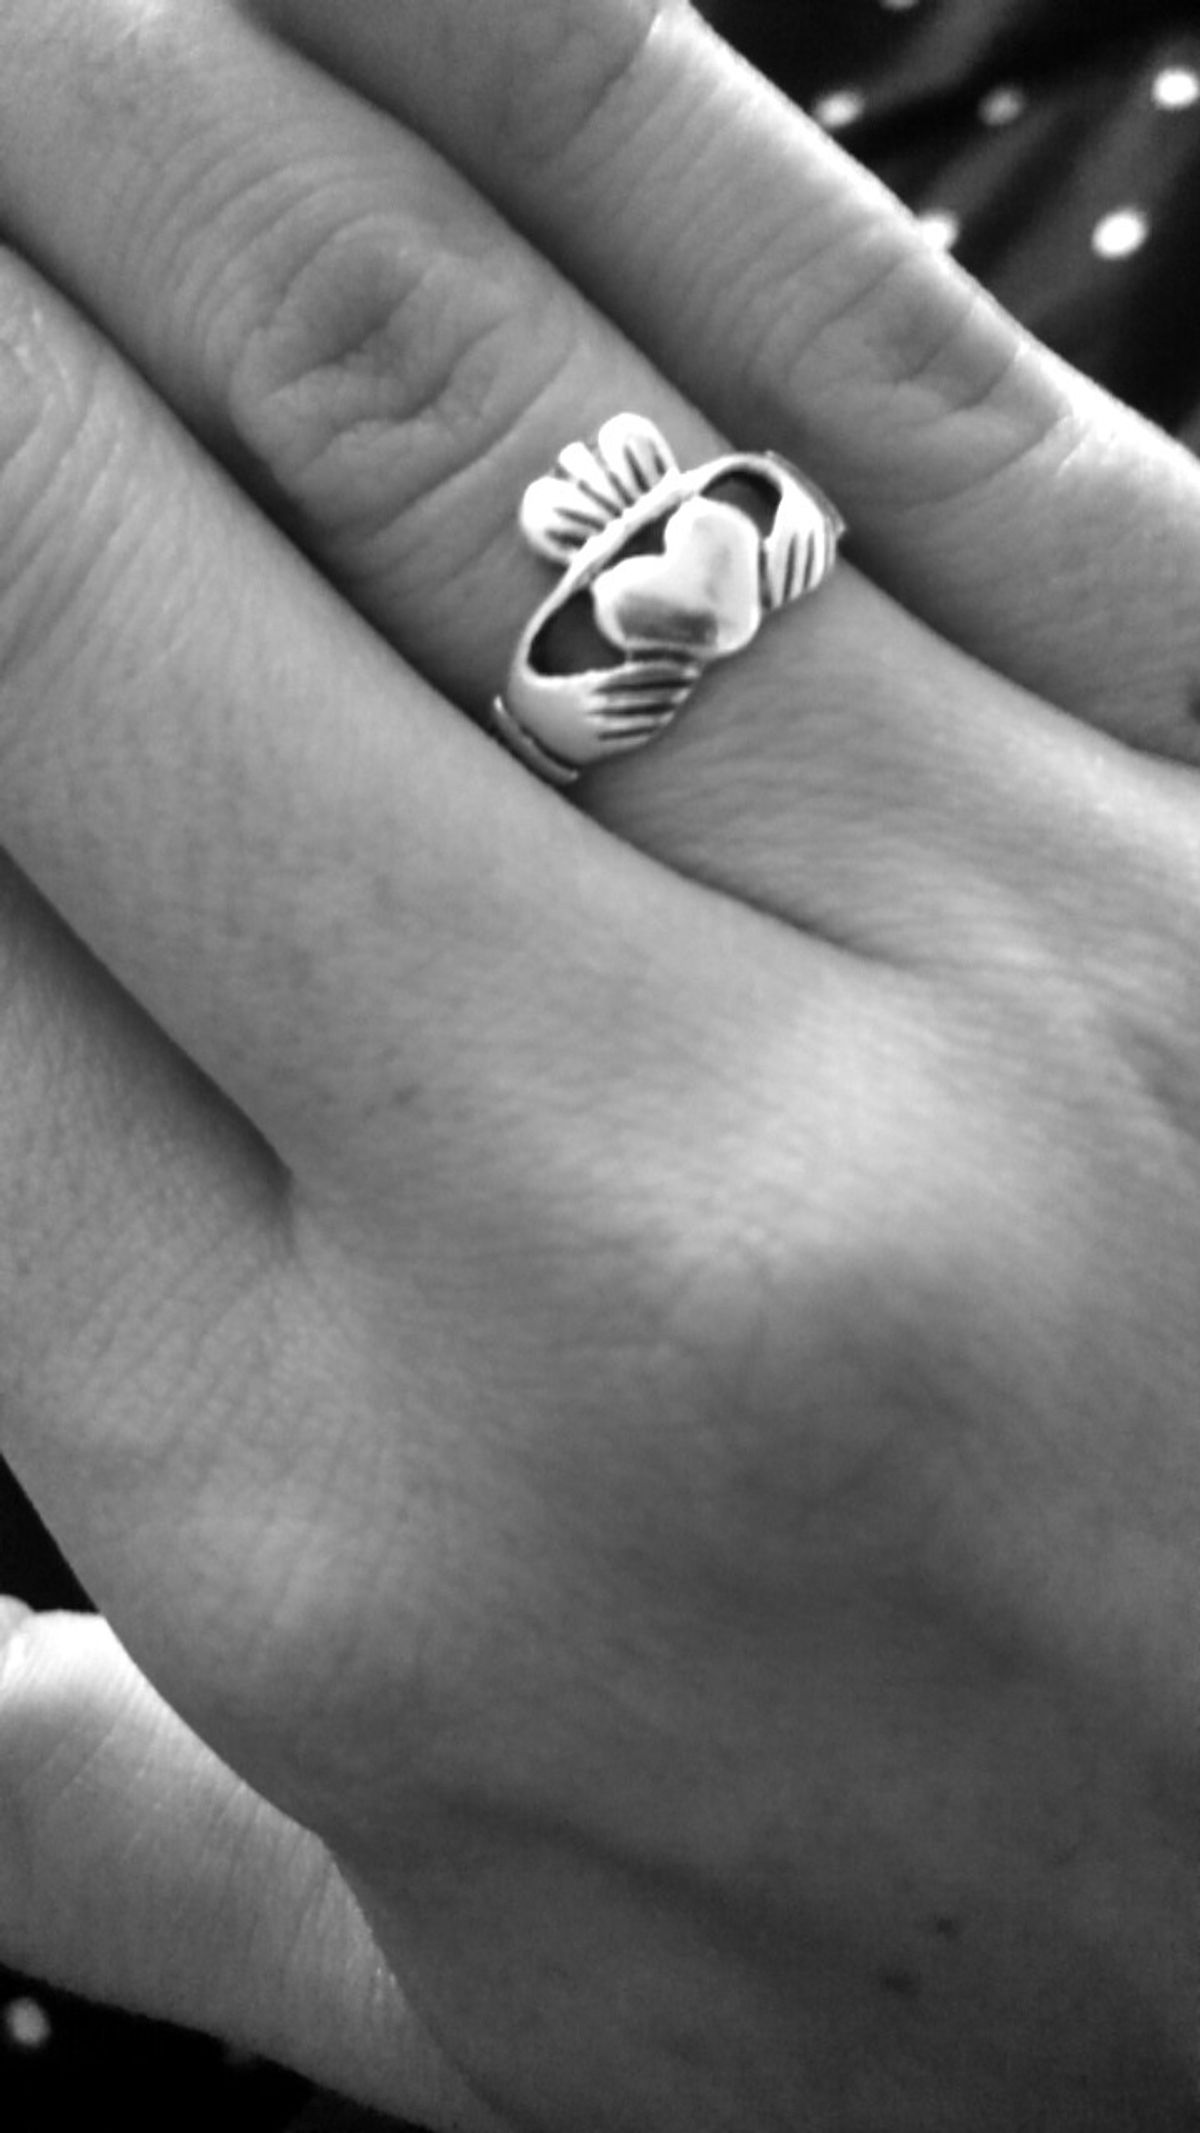 What My Claddagh Ring Represents To Me